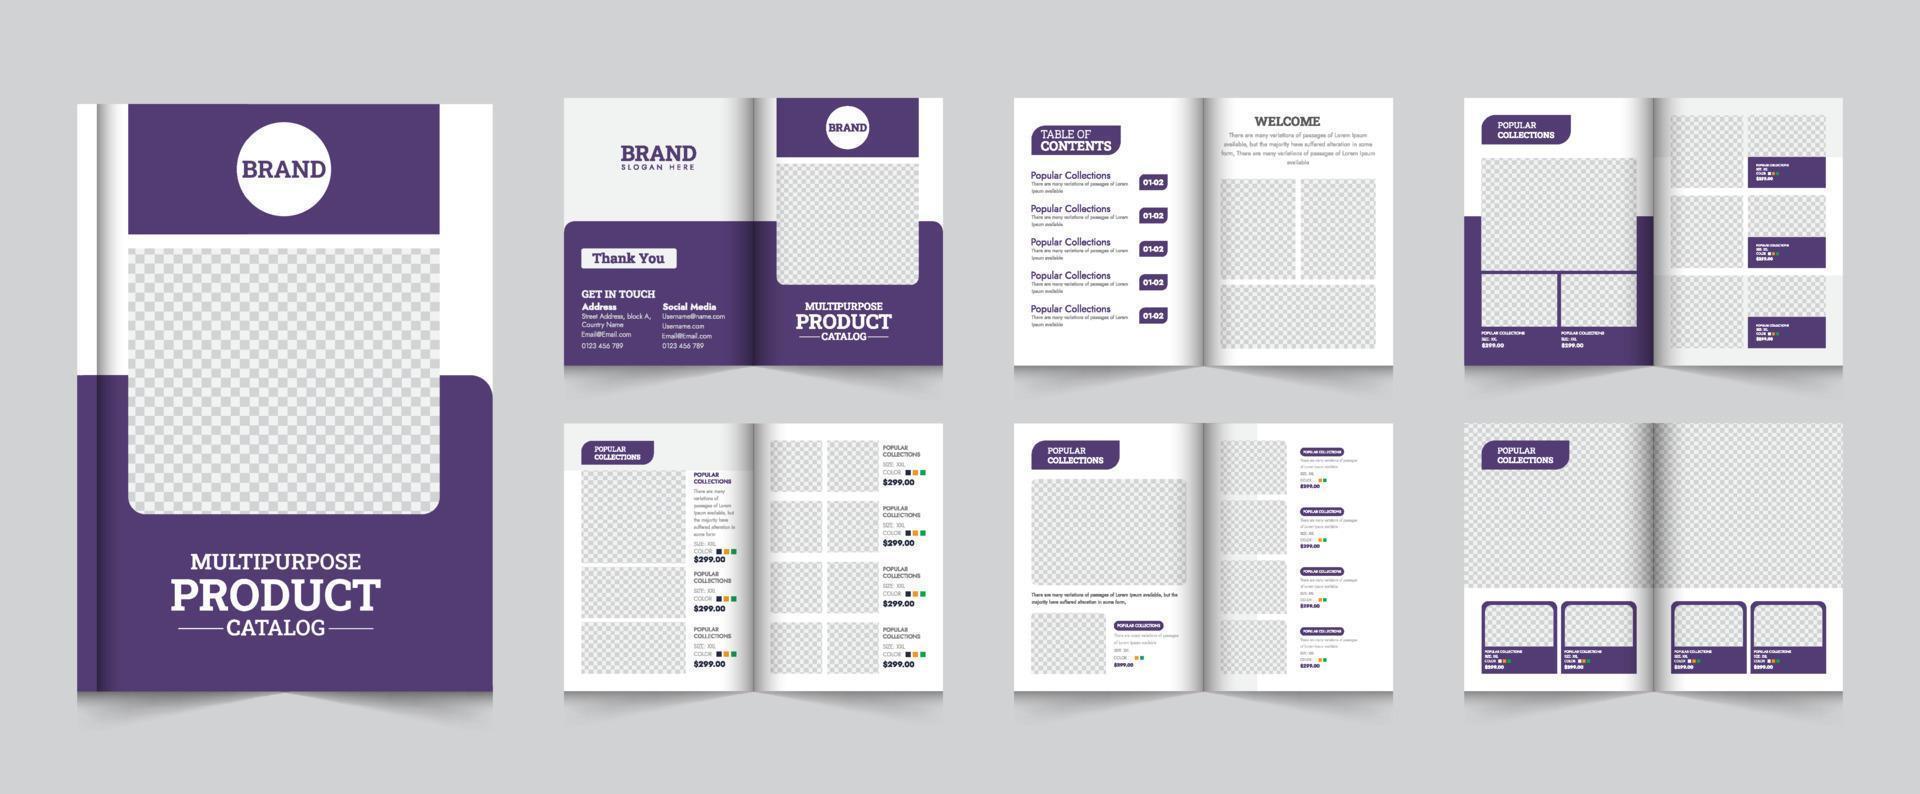 modern a4 Product catalogus ontwerp sjabloon brochure lay-out vector